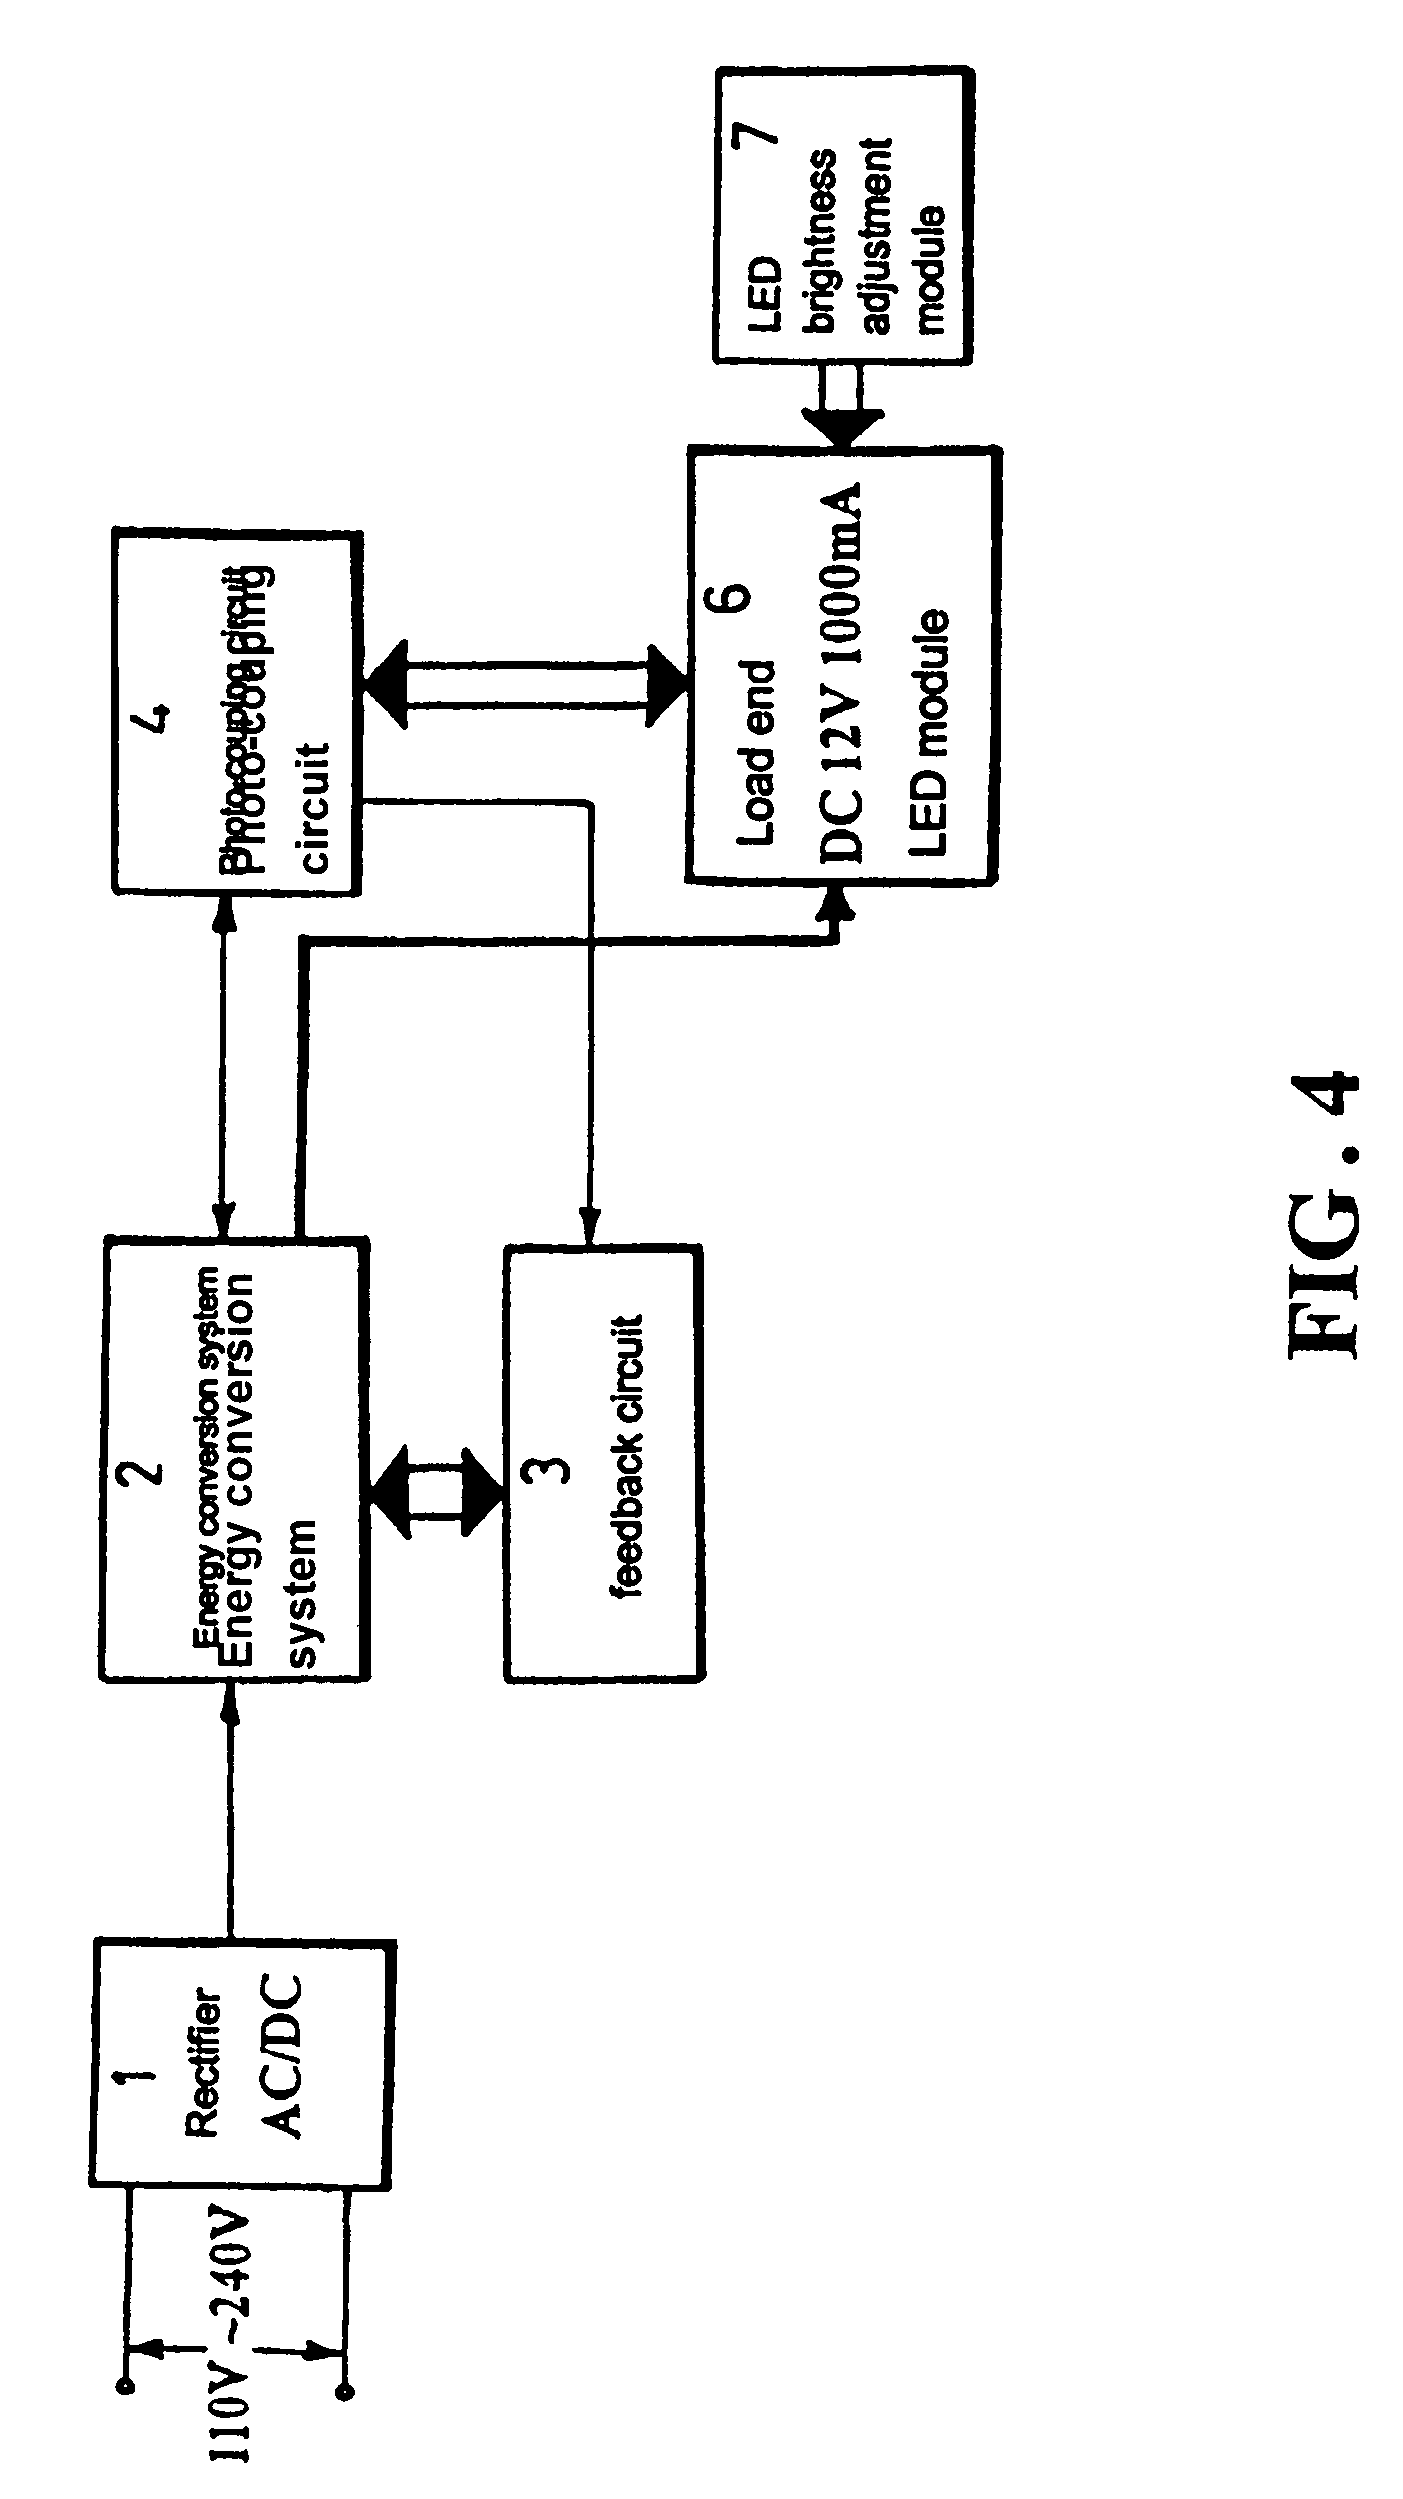 Electronic power supply device for light-emitting diode